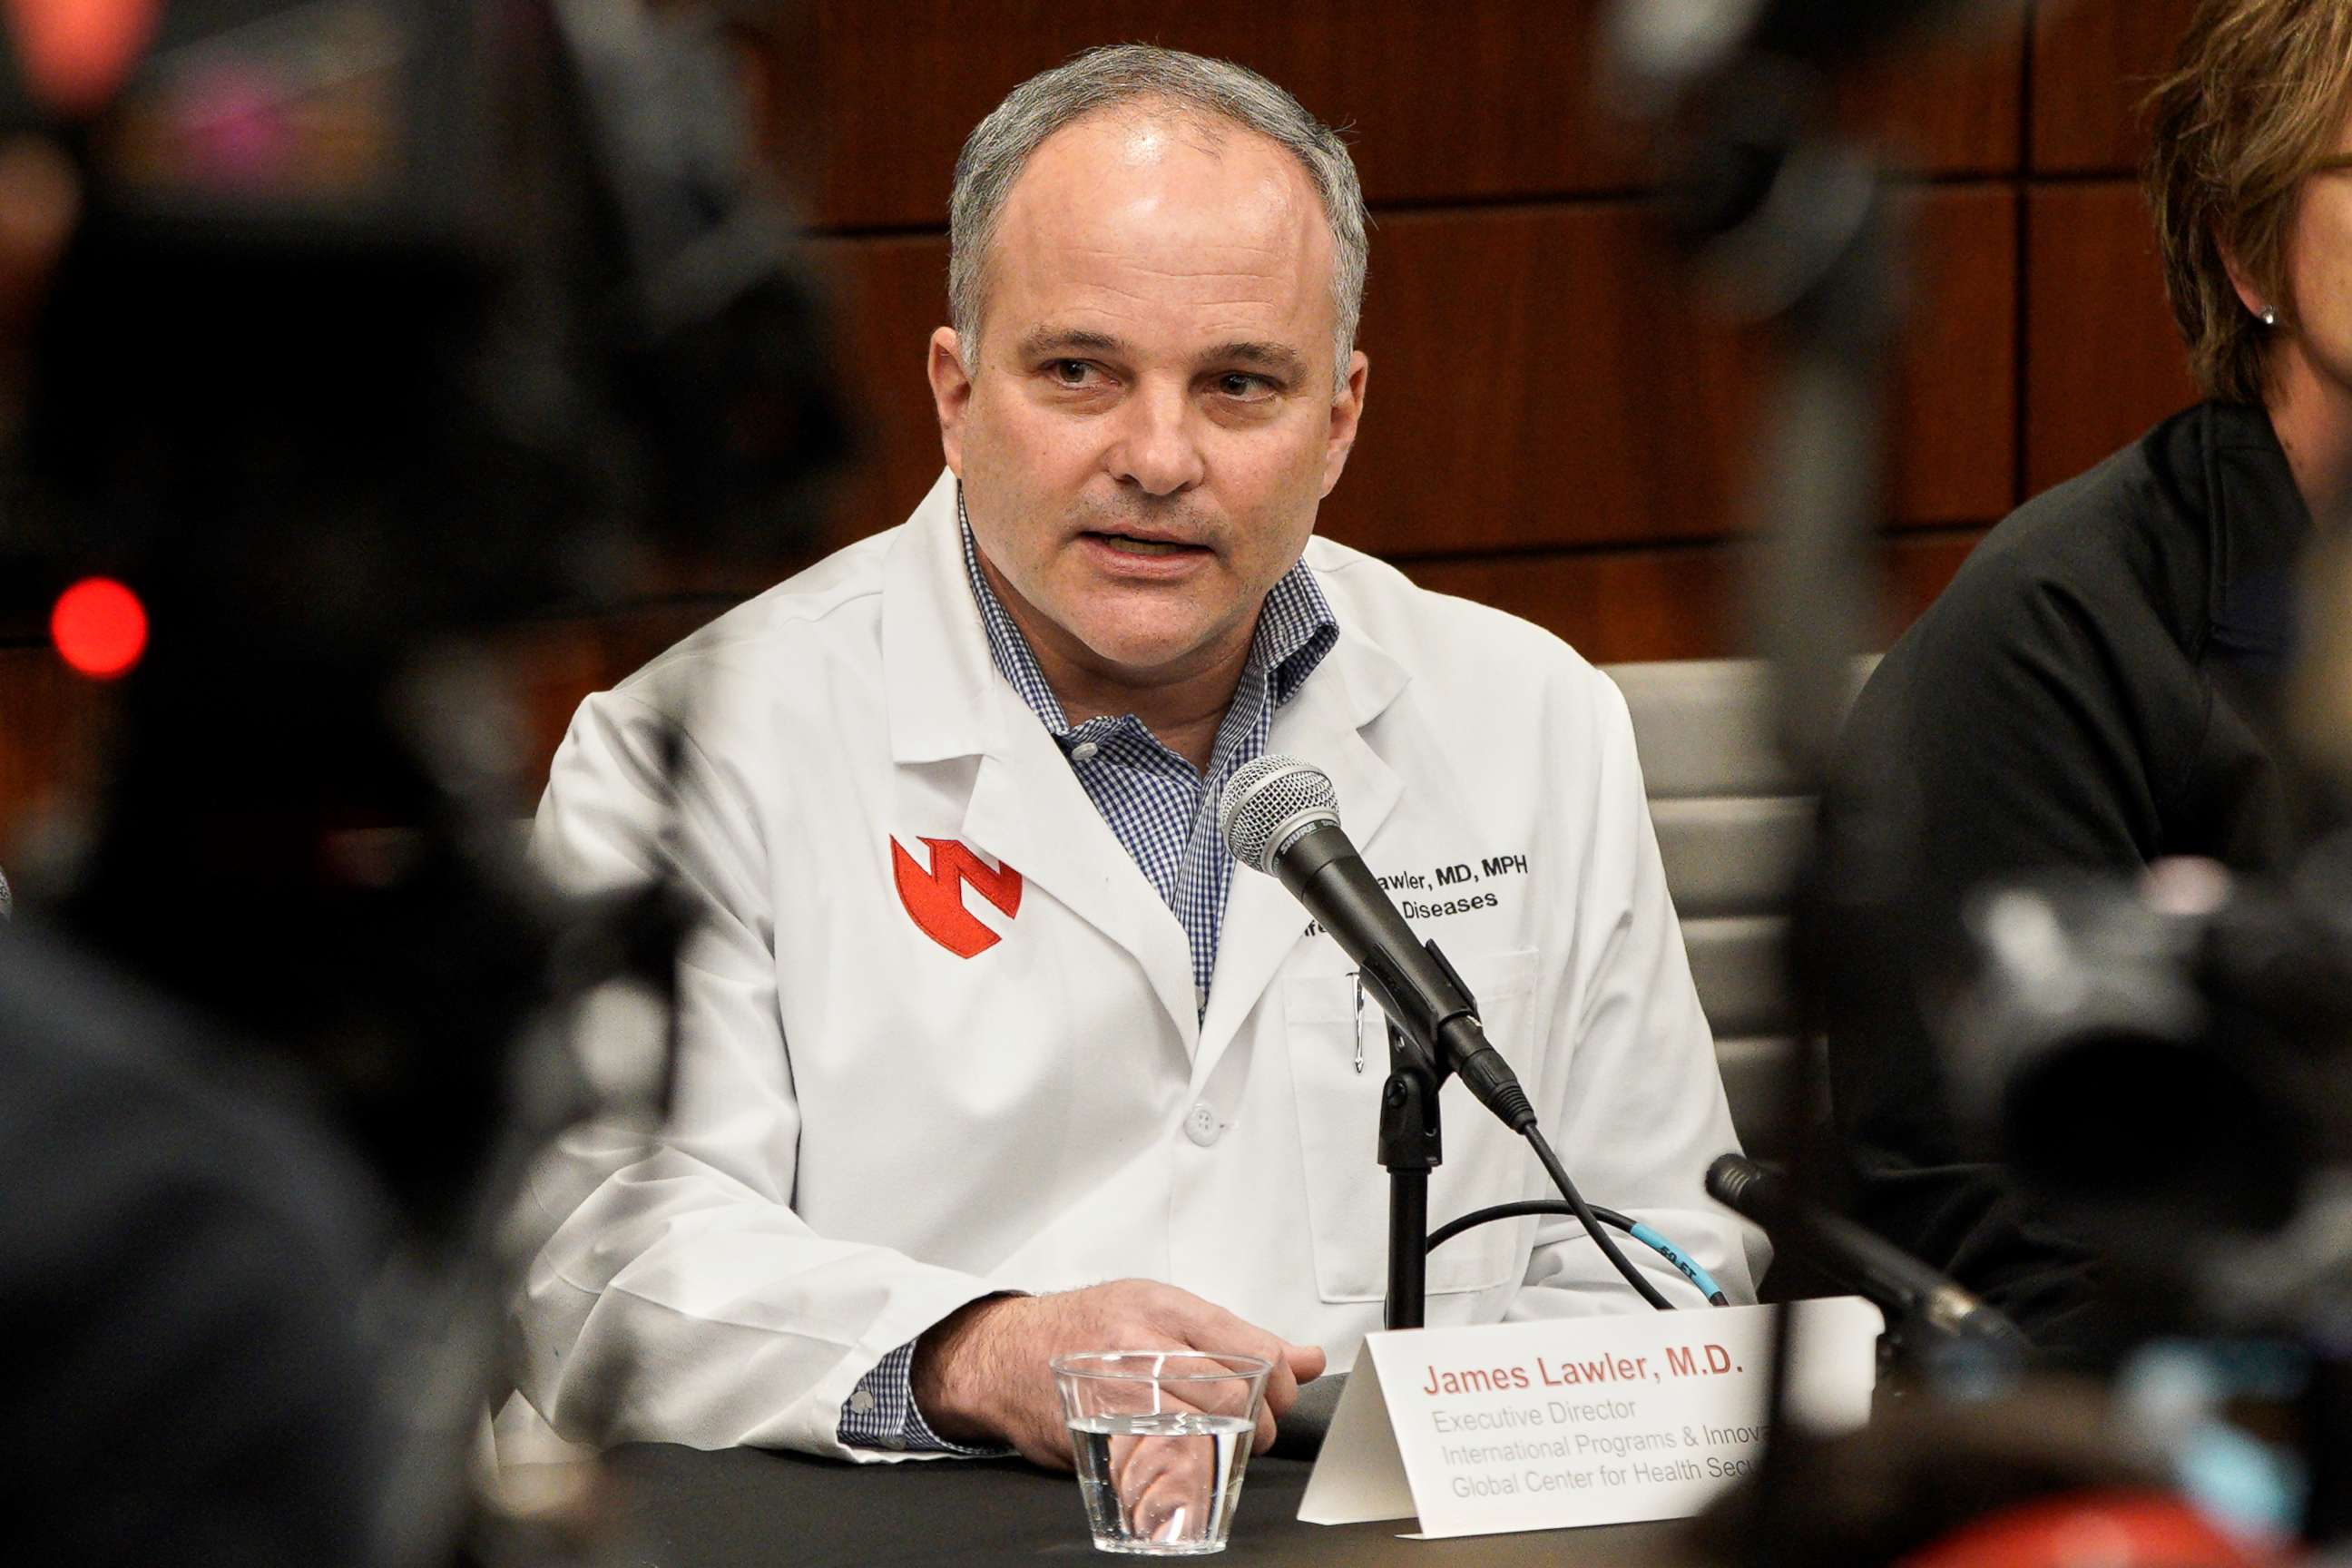 PHOTO: Dr. James Lawler, executive director of International programs & innovation, global center for health security at UNMC, participates in a news conference at the University of Nebraska Medical Center in Omaha, Neb., Feb. 6, 2020.